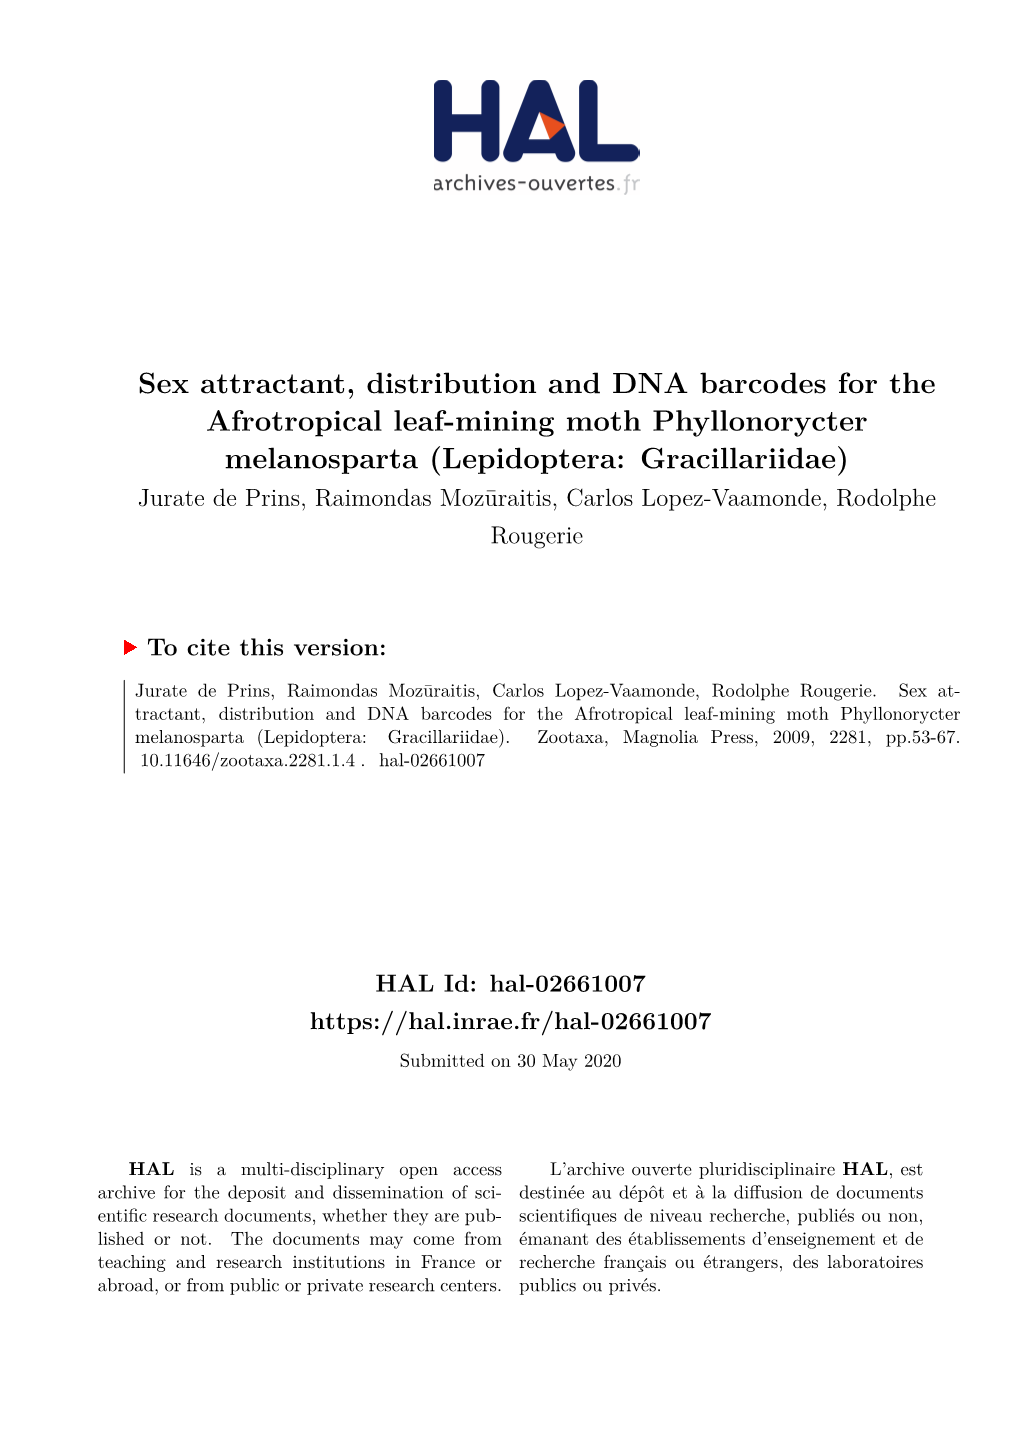 Sex Attractant, Distribution and DNA Barcodes for The